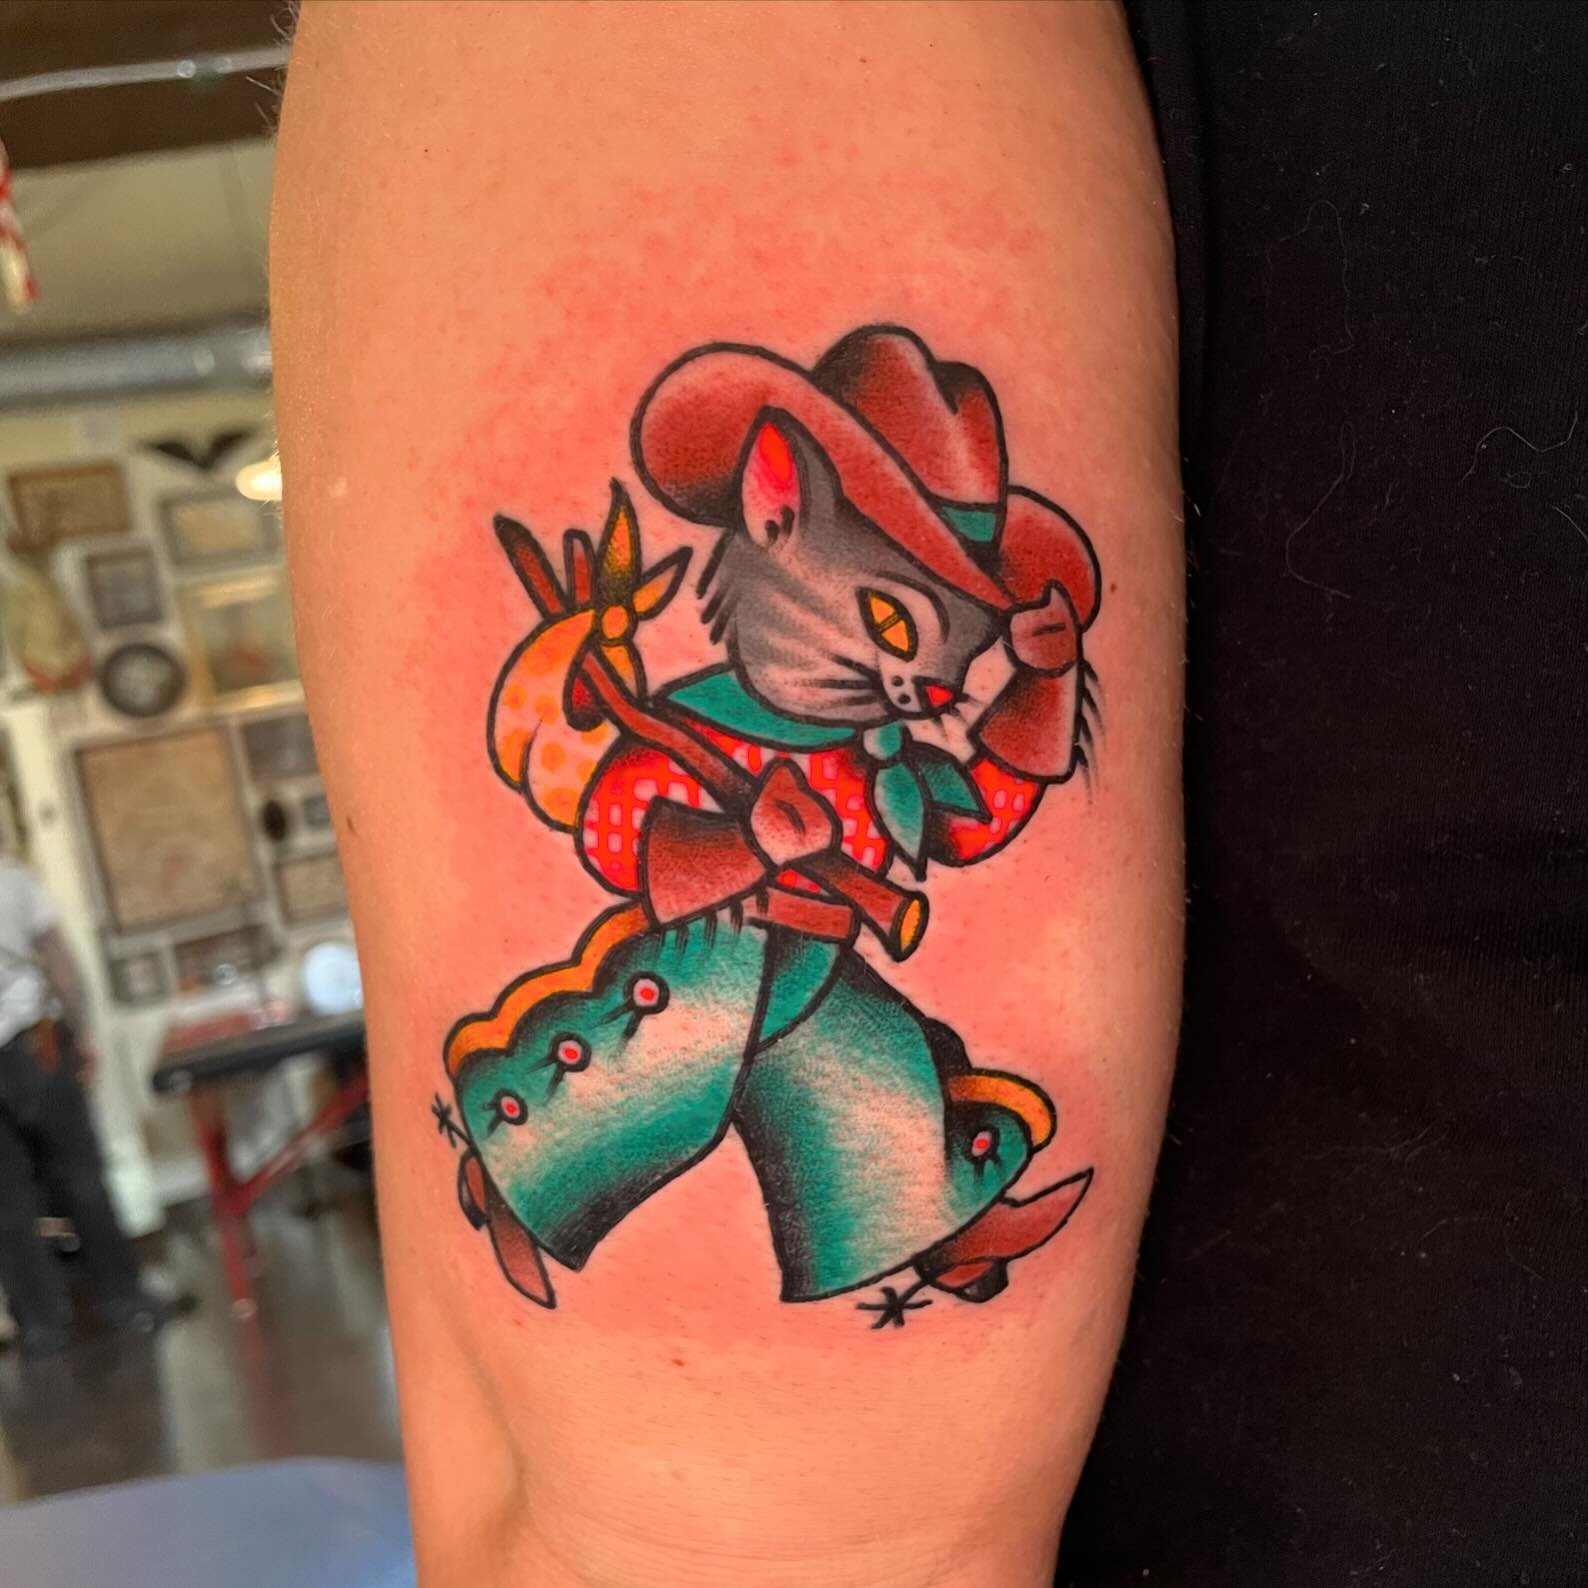 Hey y&rsquo;all! I have more cowboy dogs &amp; cats I&rsquo;d love to tattoo! Hit me up to book one! 
.
.
.
#tattoo #tattoos #okc #oklahomacity #oklahoma #oklahomacitytattoo #oklahomacitytattooartist  #oklahomatattooartist #oklahomatattoo #americantr